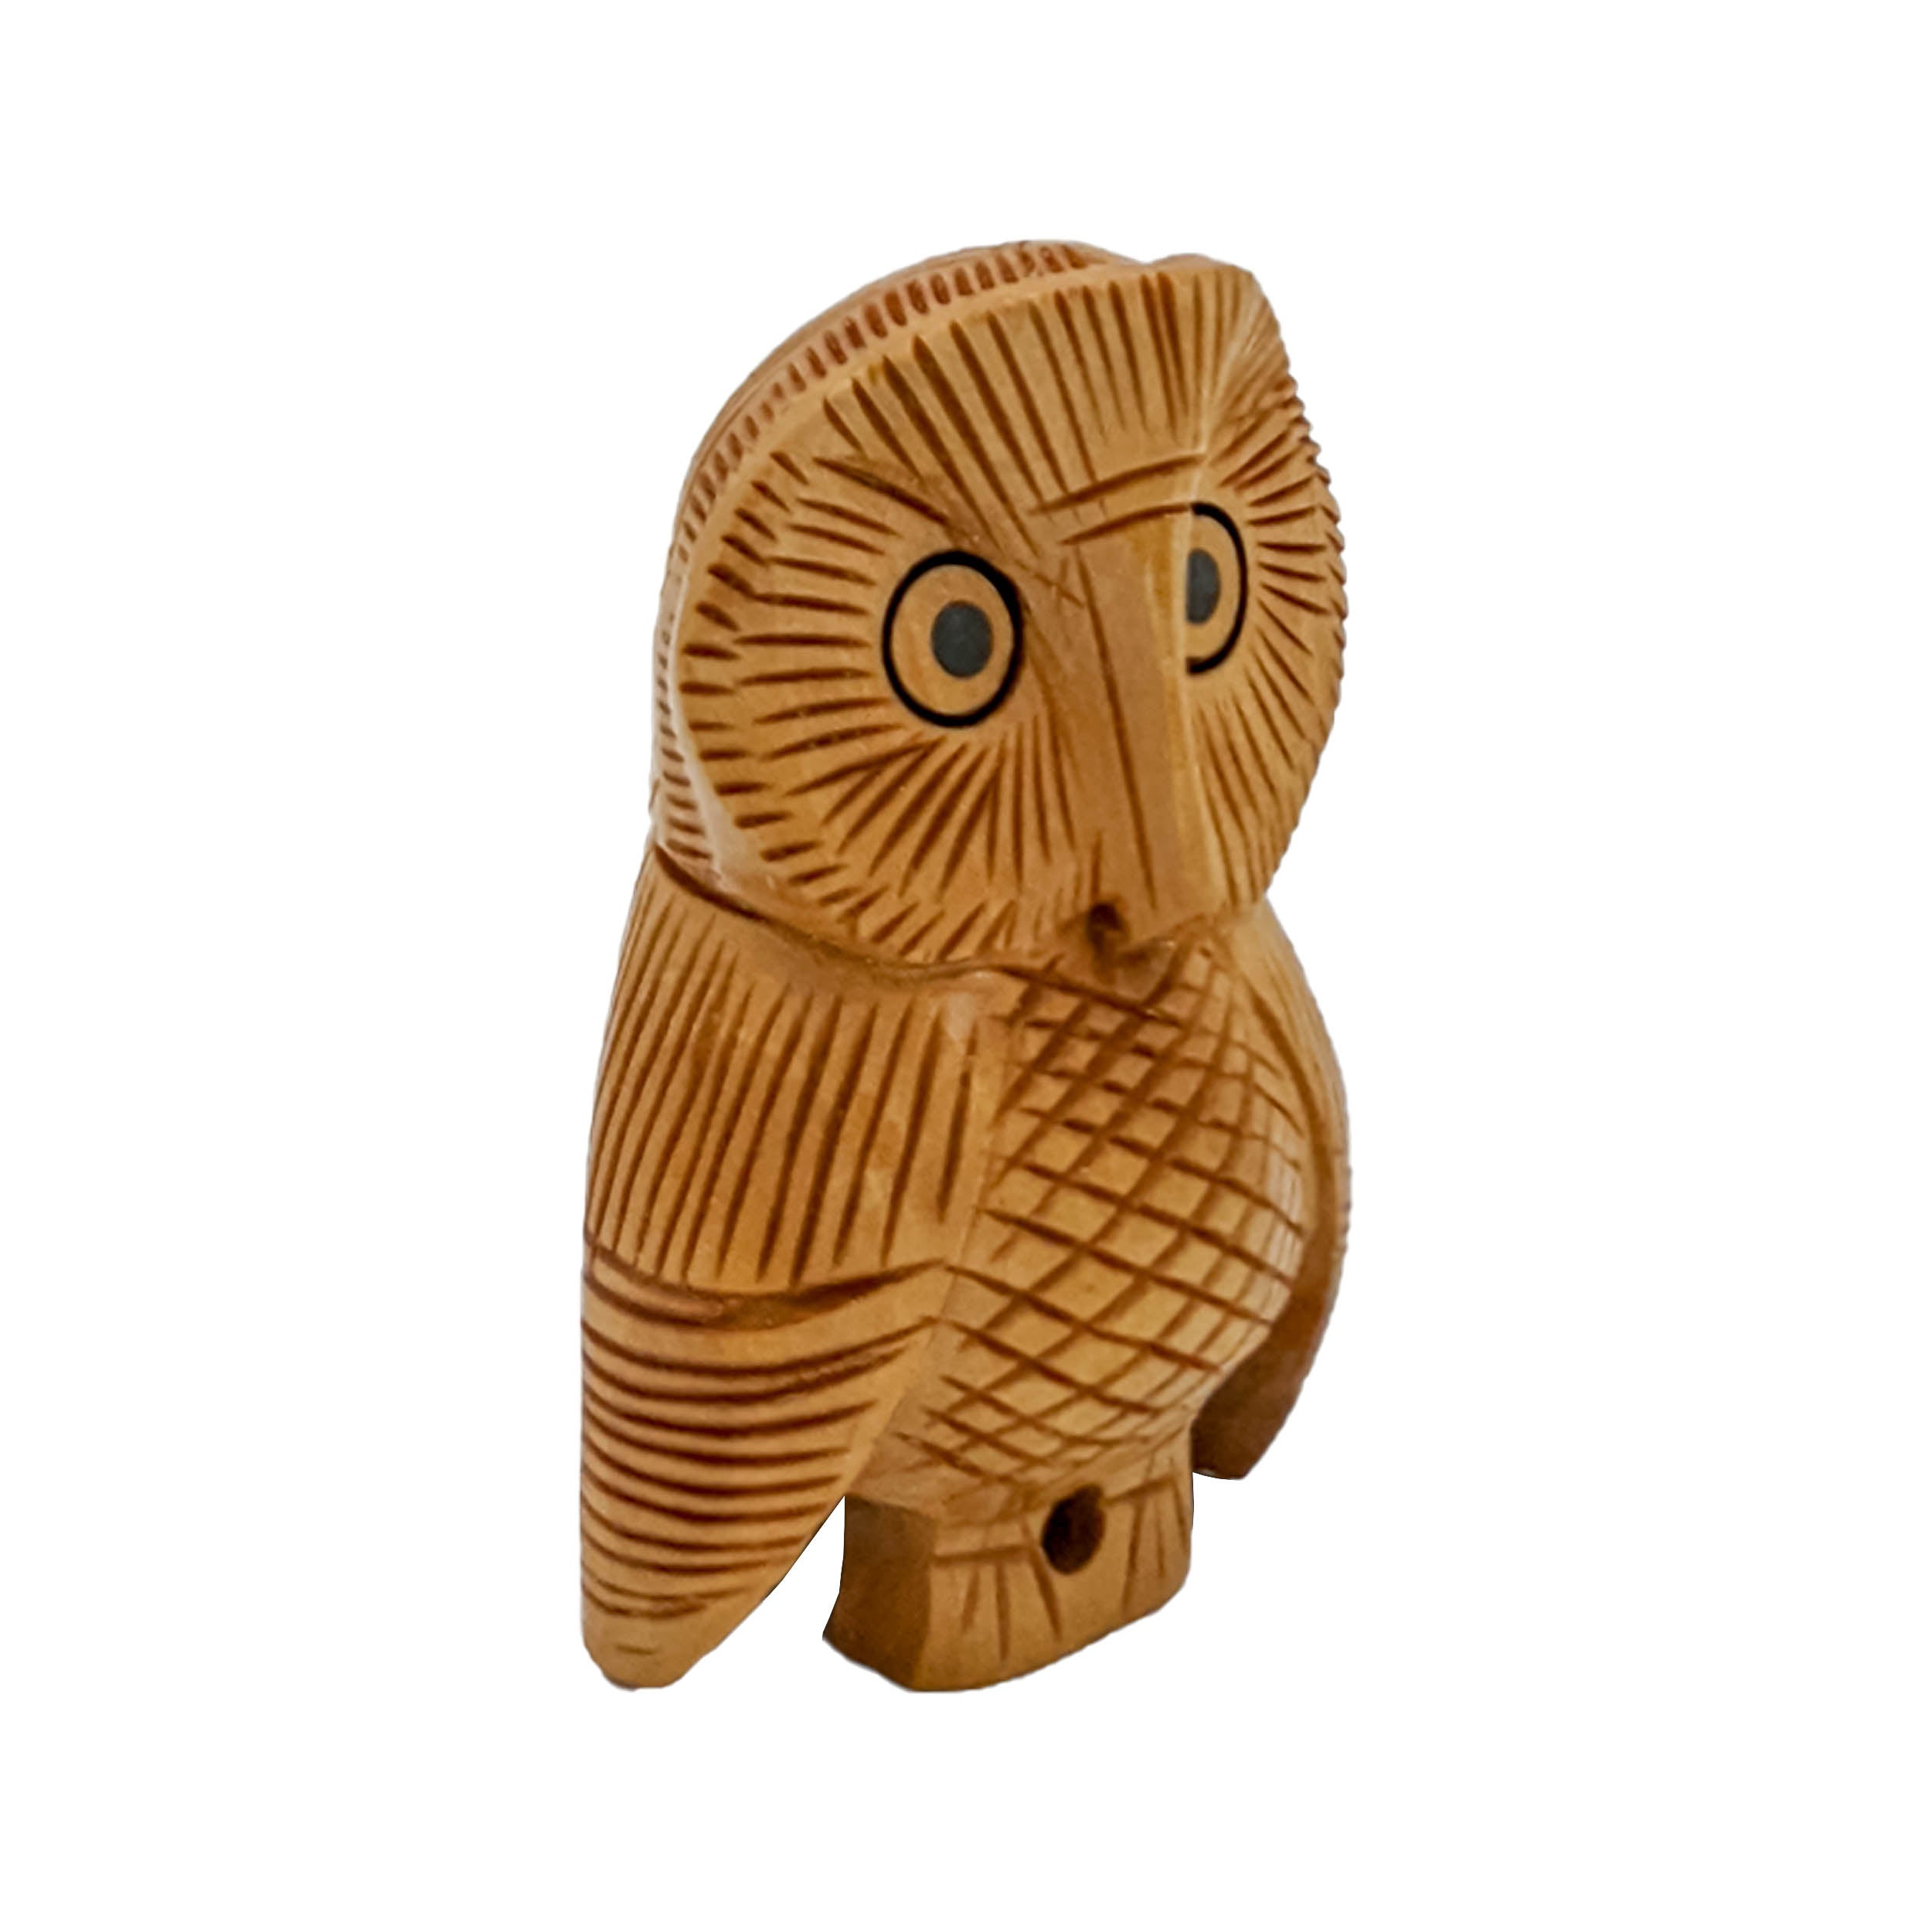 Bring Home the Charm of Handmade Wooden Owl Sitting